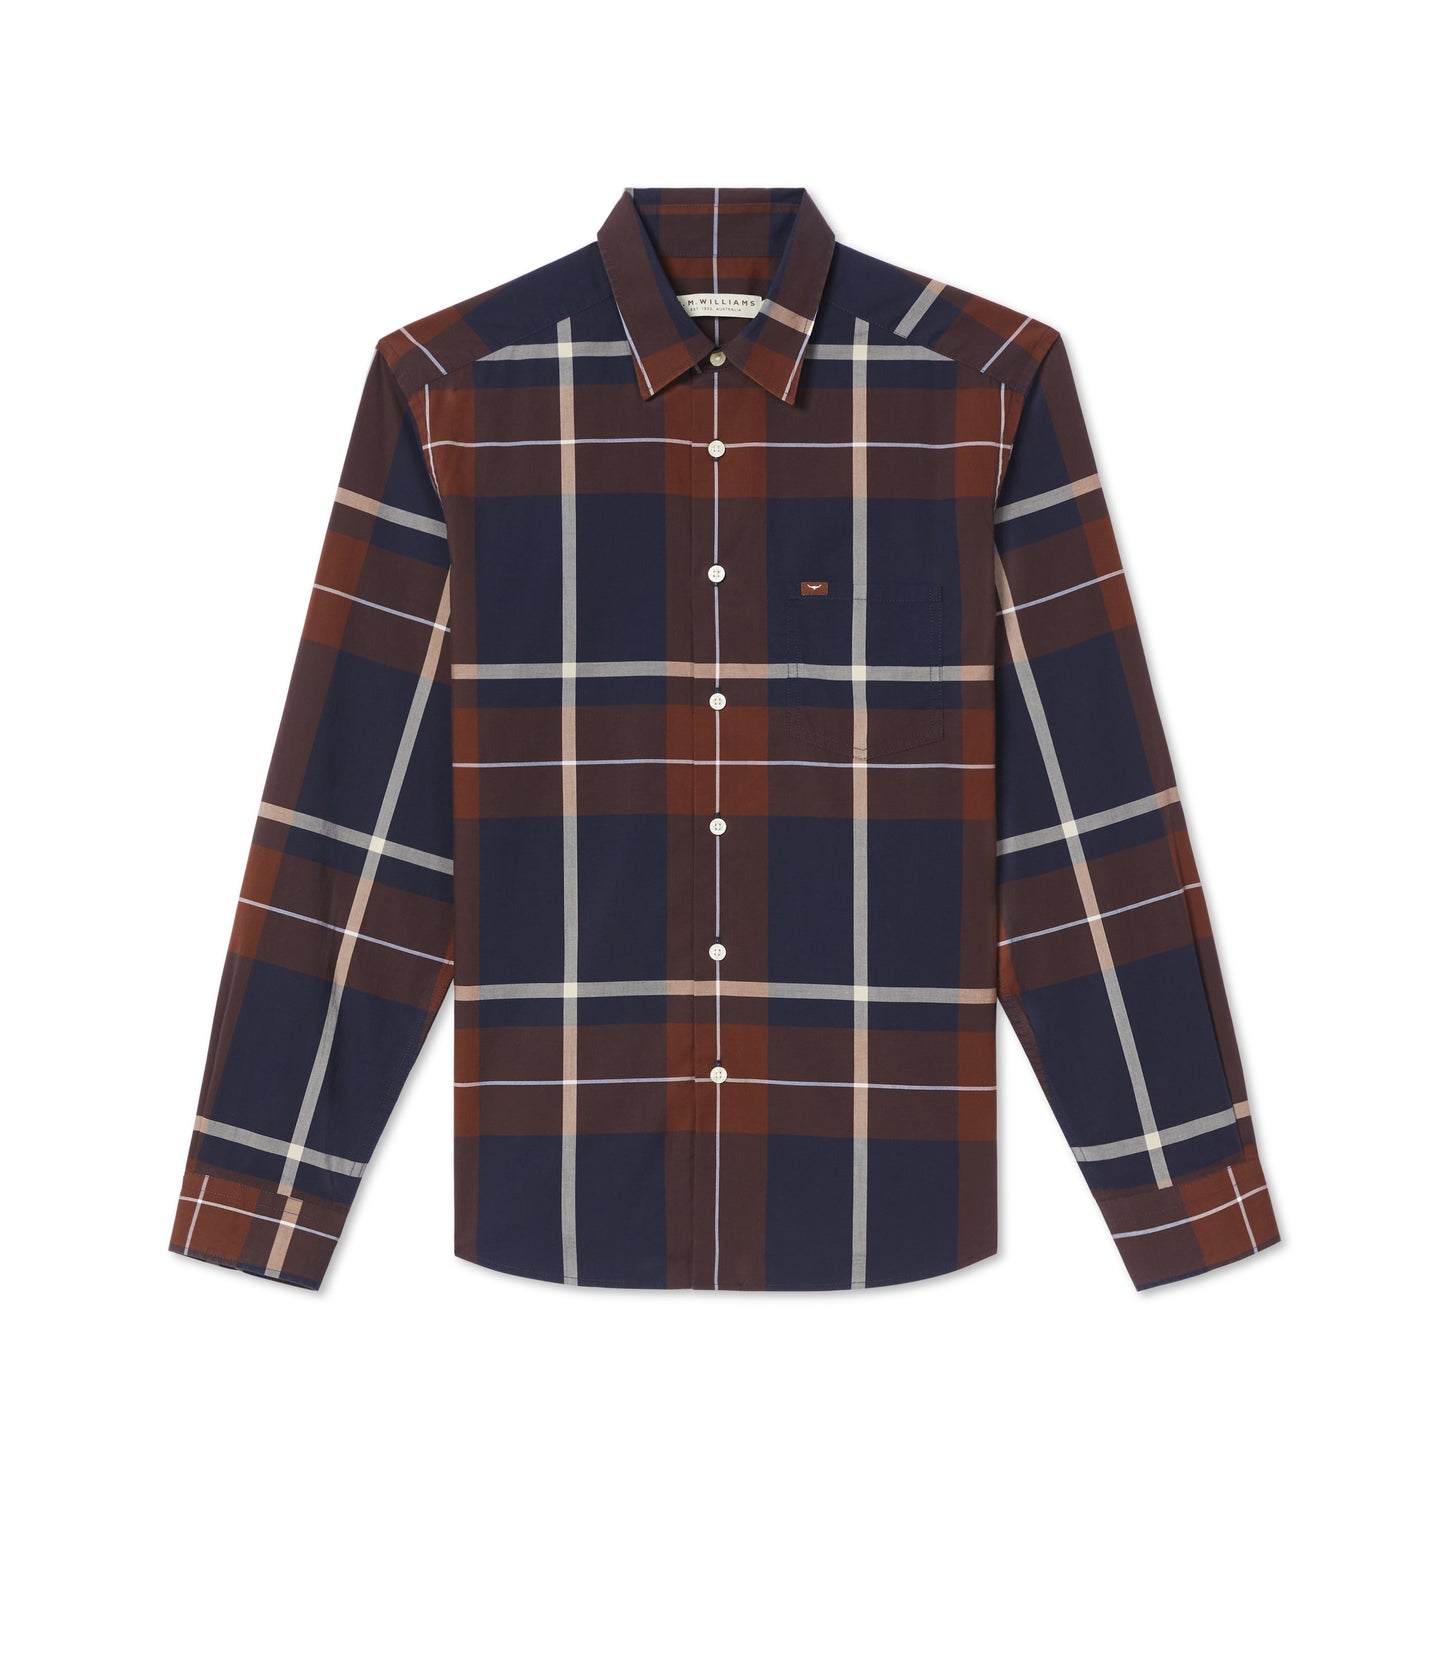 R.M Williams Shirts, The Coalcliff Shirt in Brown Navy Whit